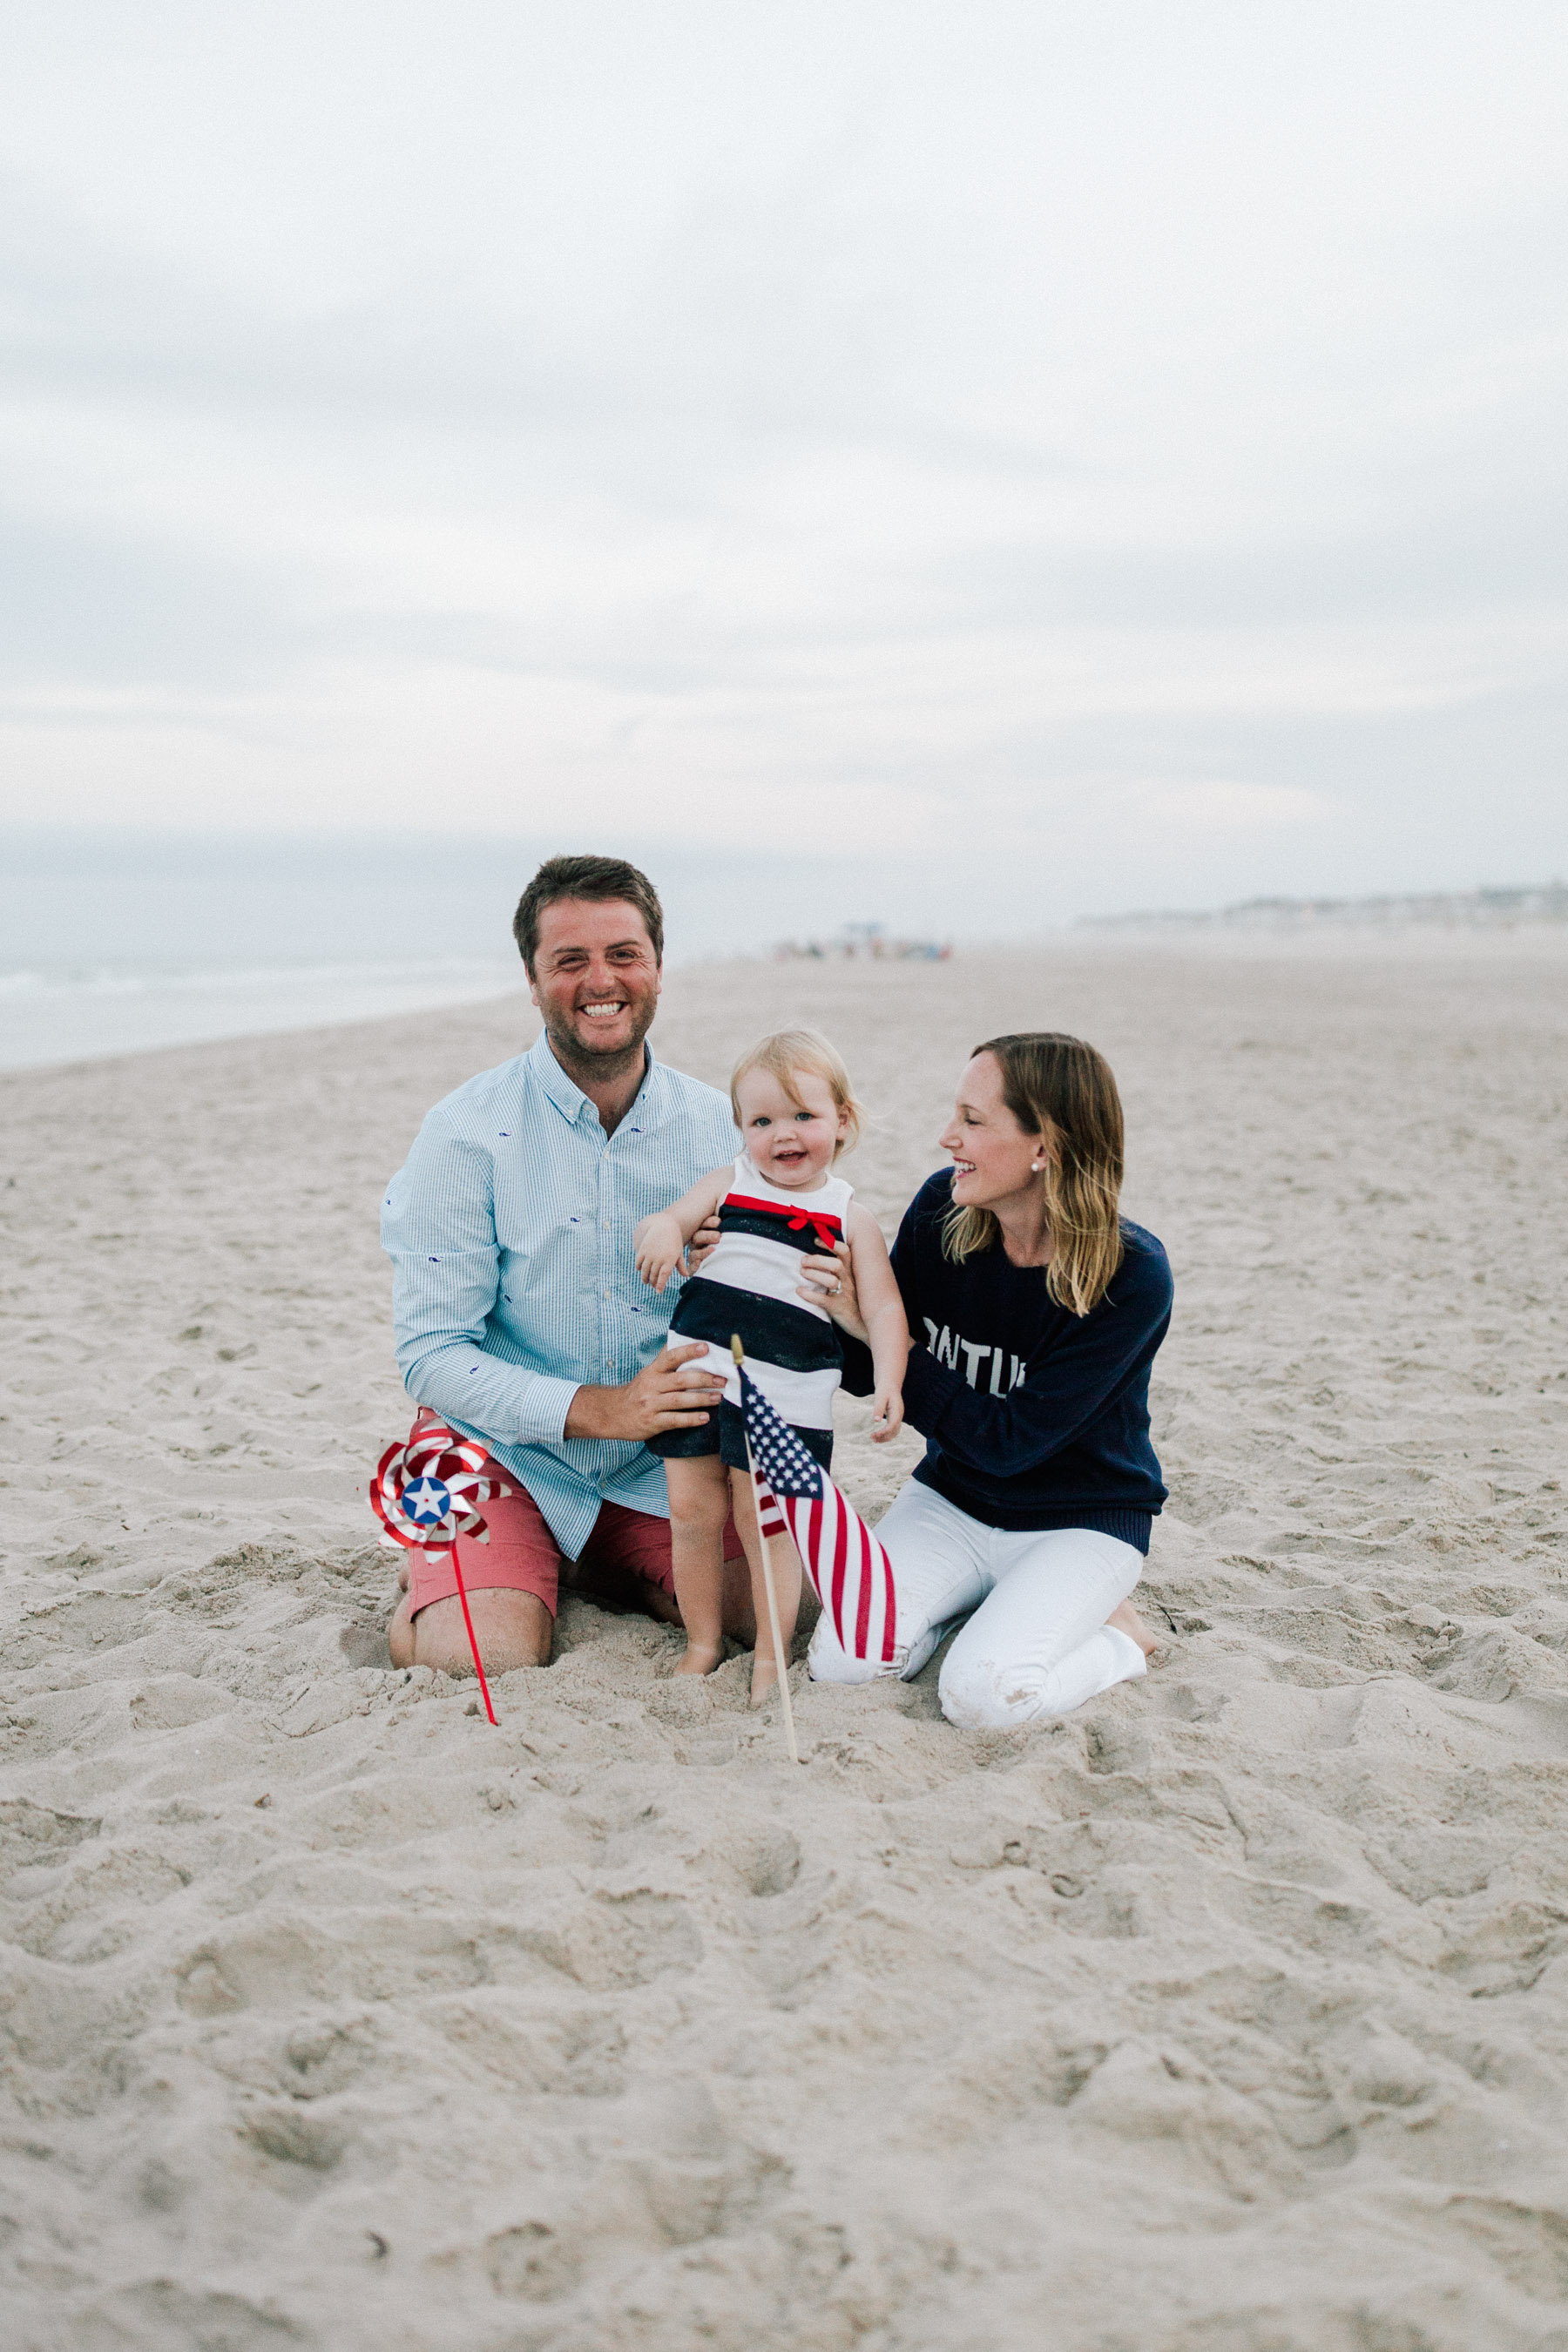 Our Fourth of July | Larkin Family